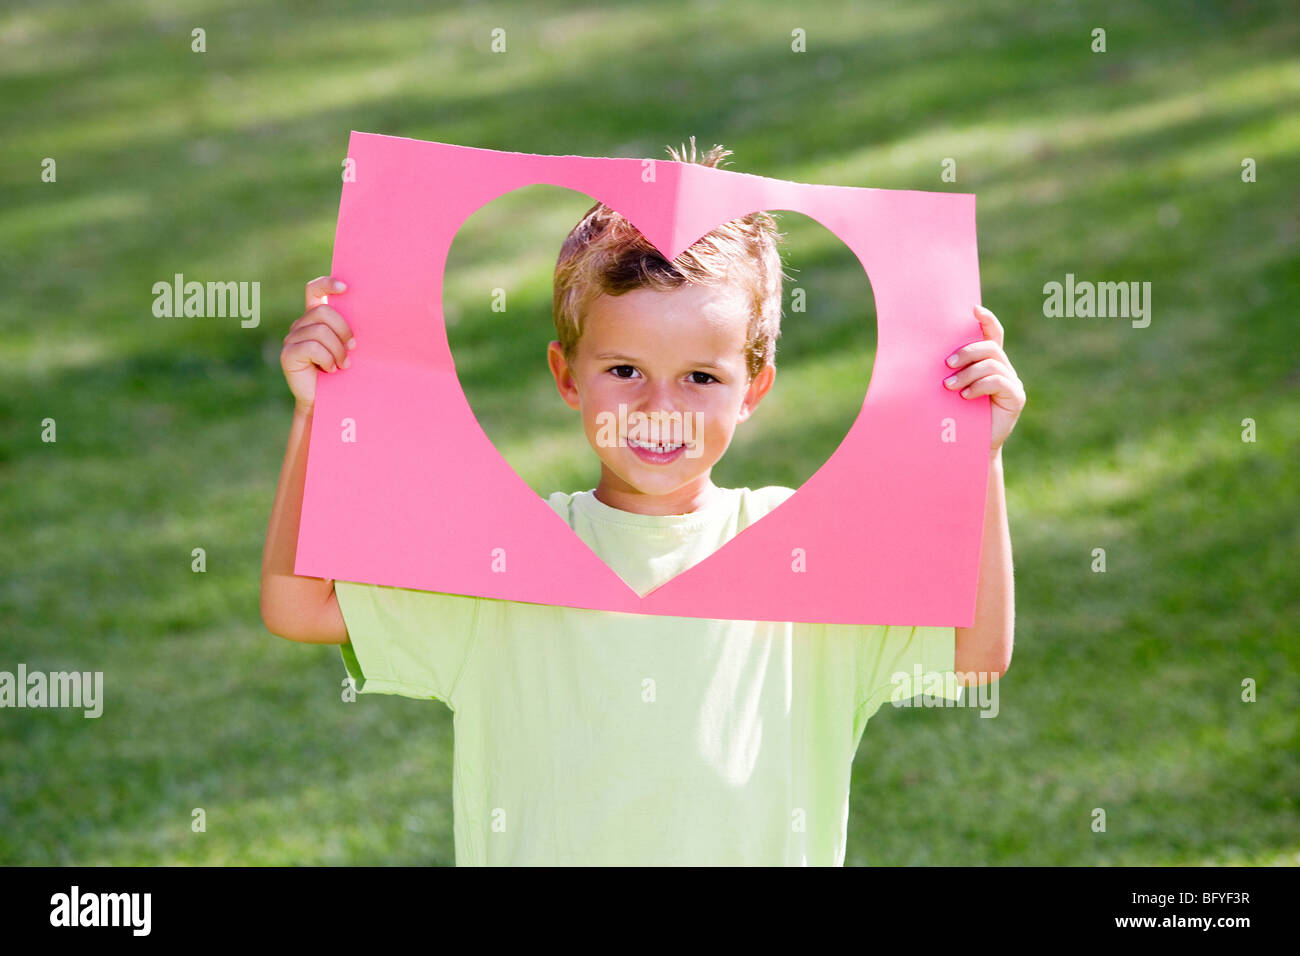 Young boy holding paper heart frame Banque D'Images